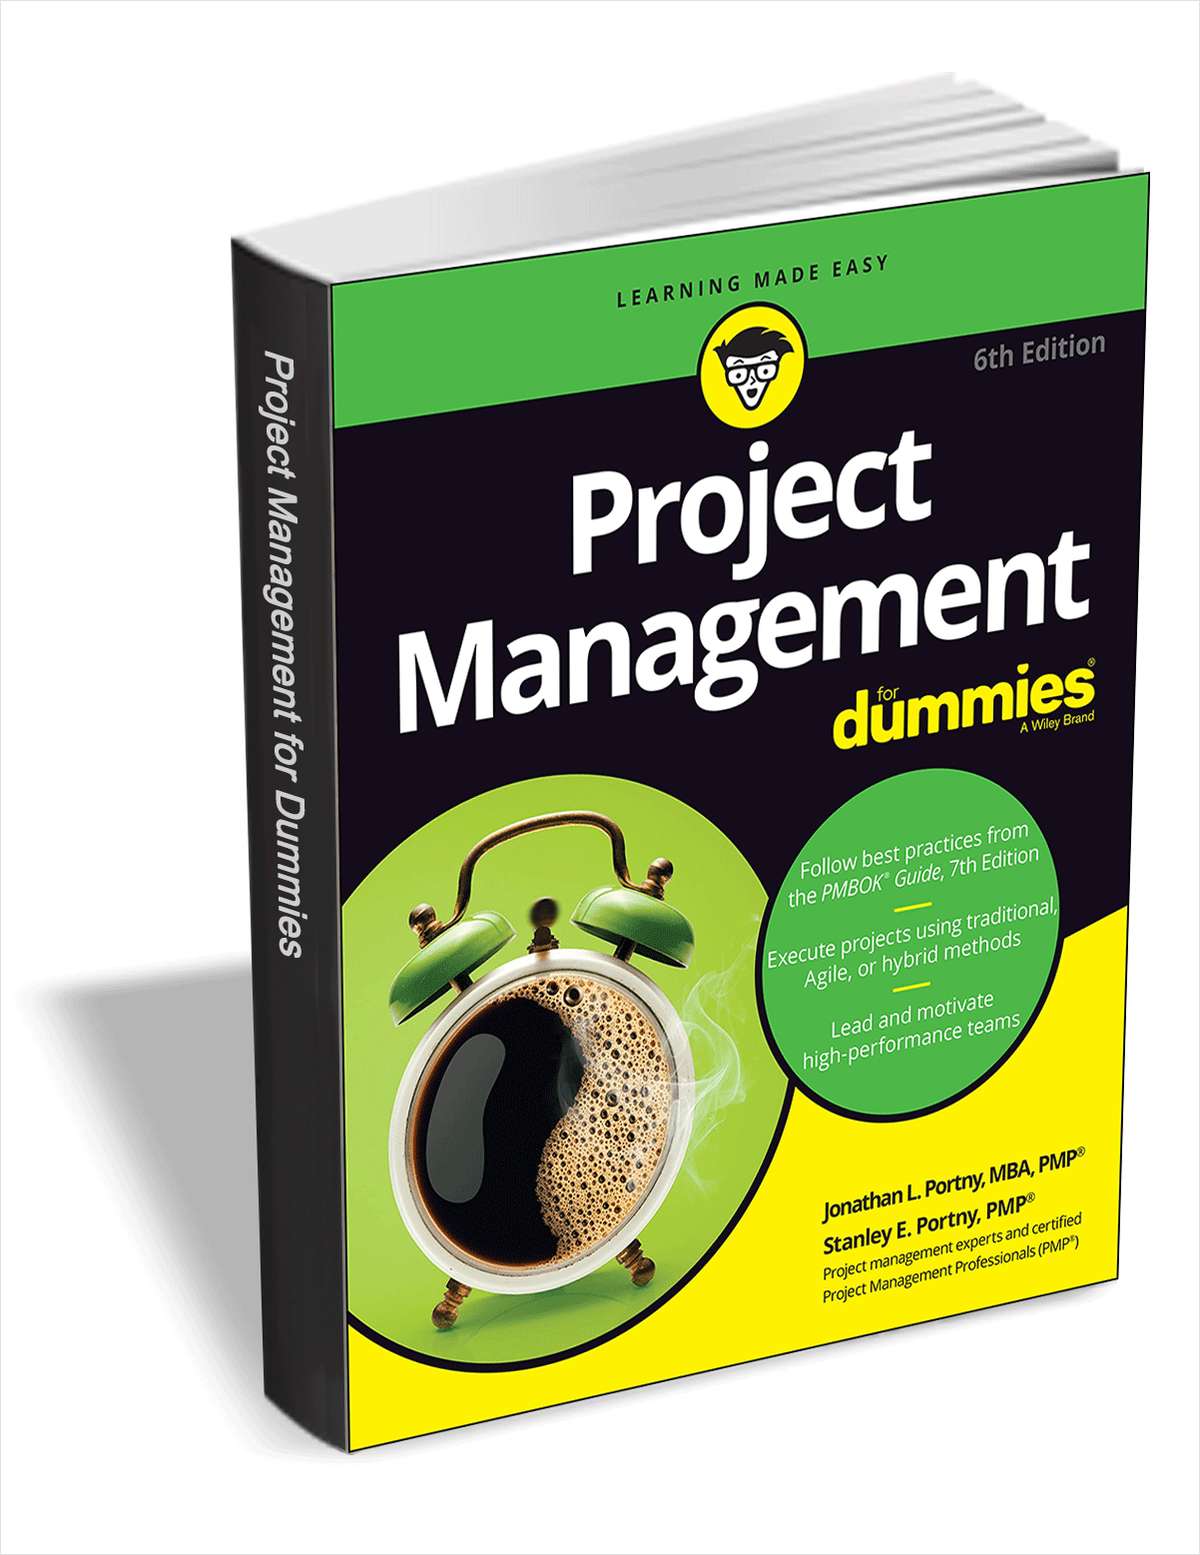 No-Brainer Bundle: Project Management for You (Hardcover, eBook, and Audio  Book Versions) - PM for the Masses